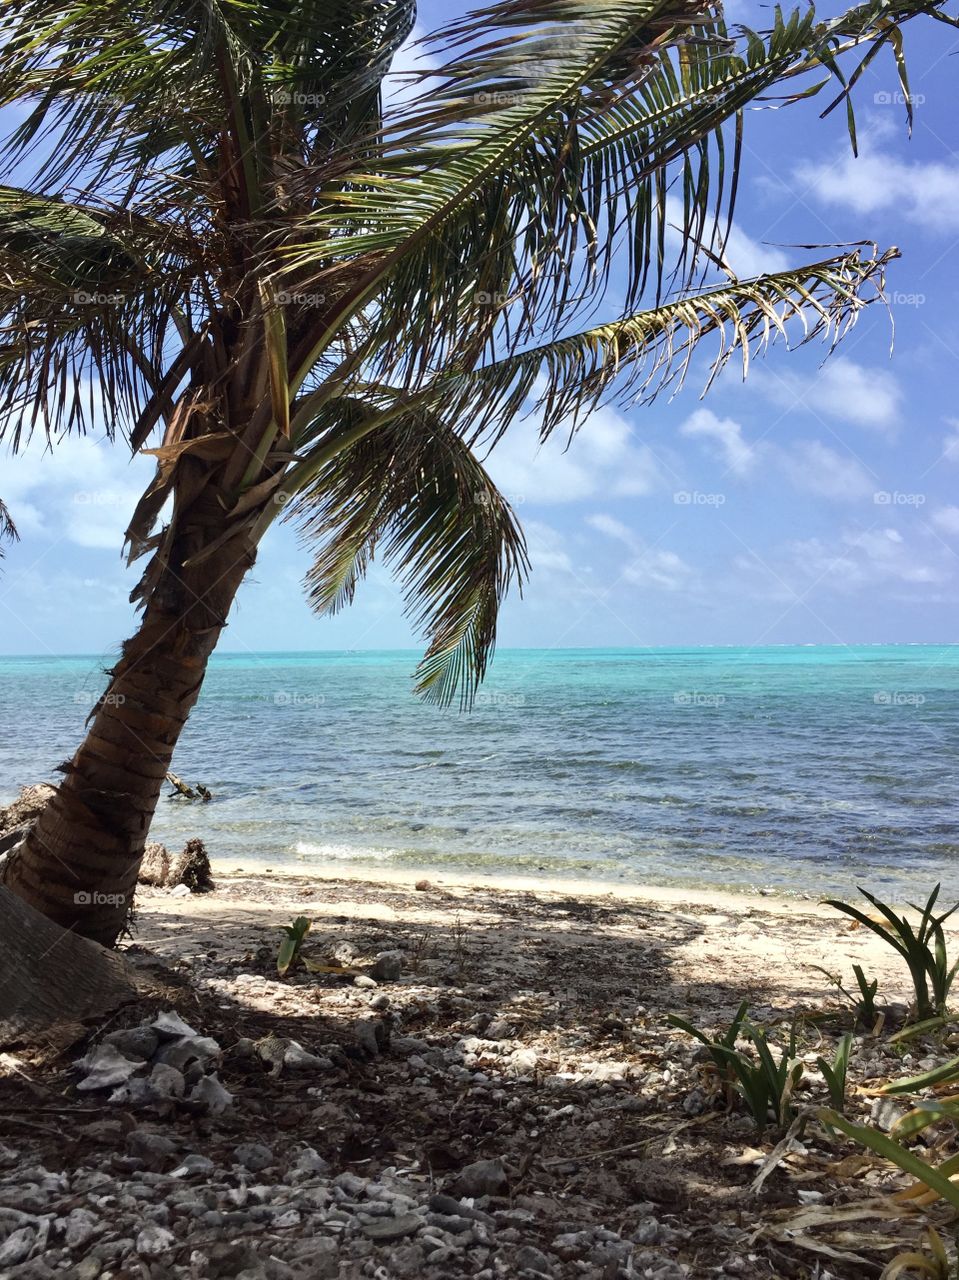 Rocky coastline on half moon Caye in Belize a palm tree is leaning over the ocean